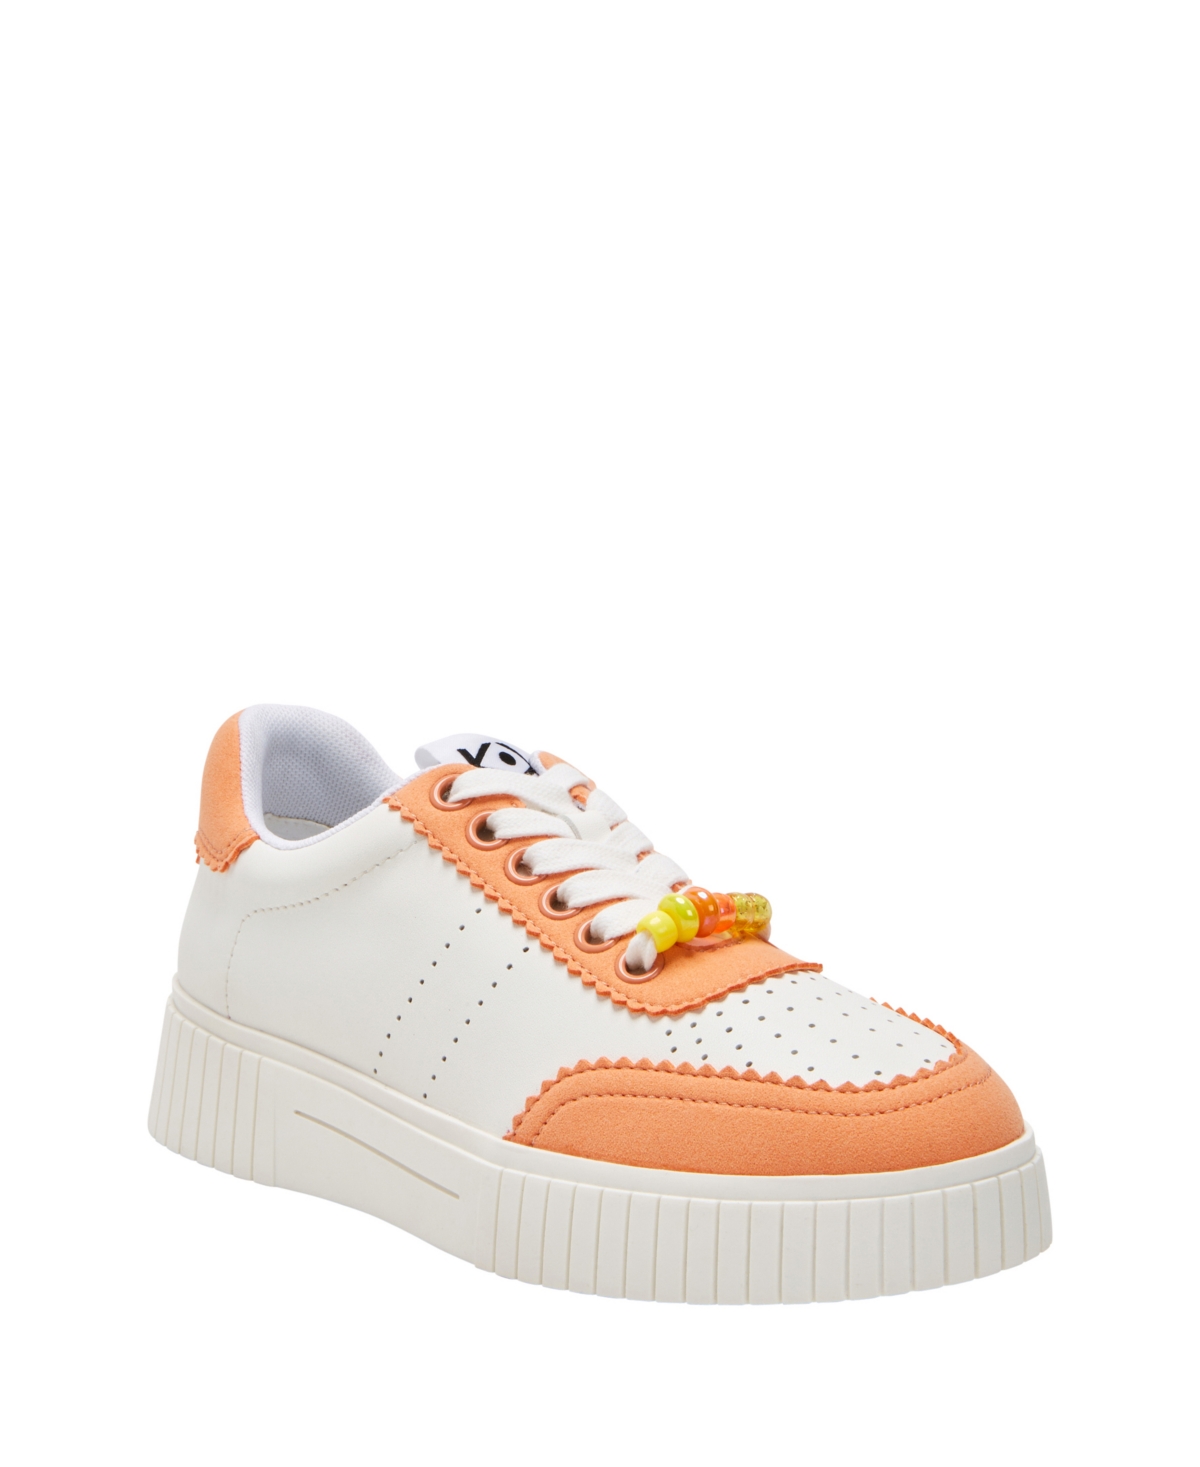 KATY PERRY WOMEN'S THE SKATTER BEAD LACE-UP SNEAKERS WOMEN'S SHOES